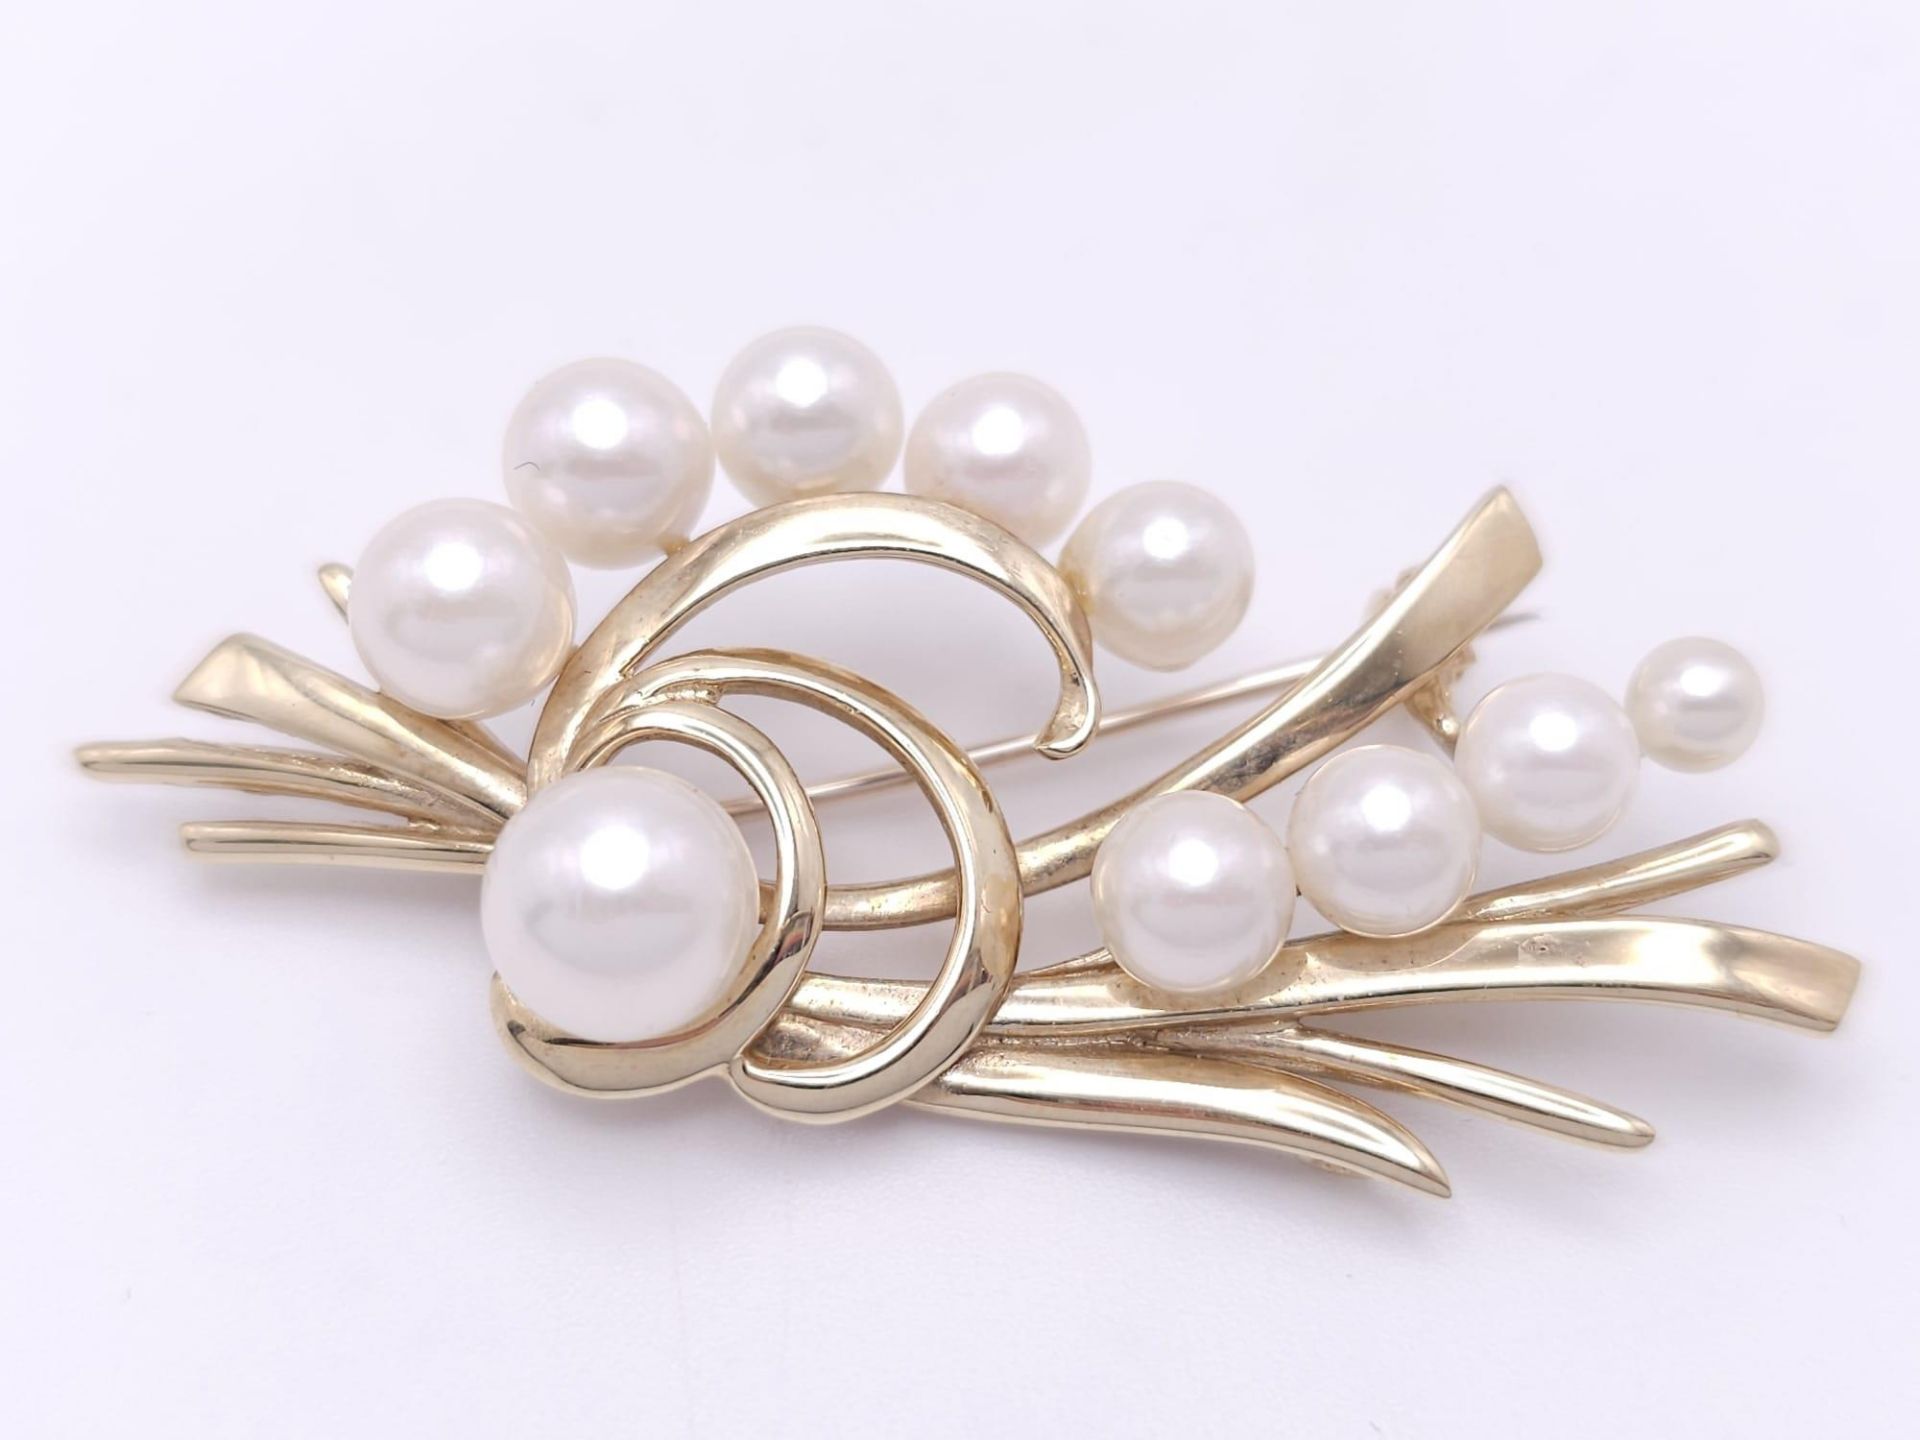 A 9k Yellow Gold and Pearl Decorative Floral Brooch. 5cm. 8g weight - Image 8 of 23